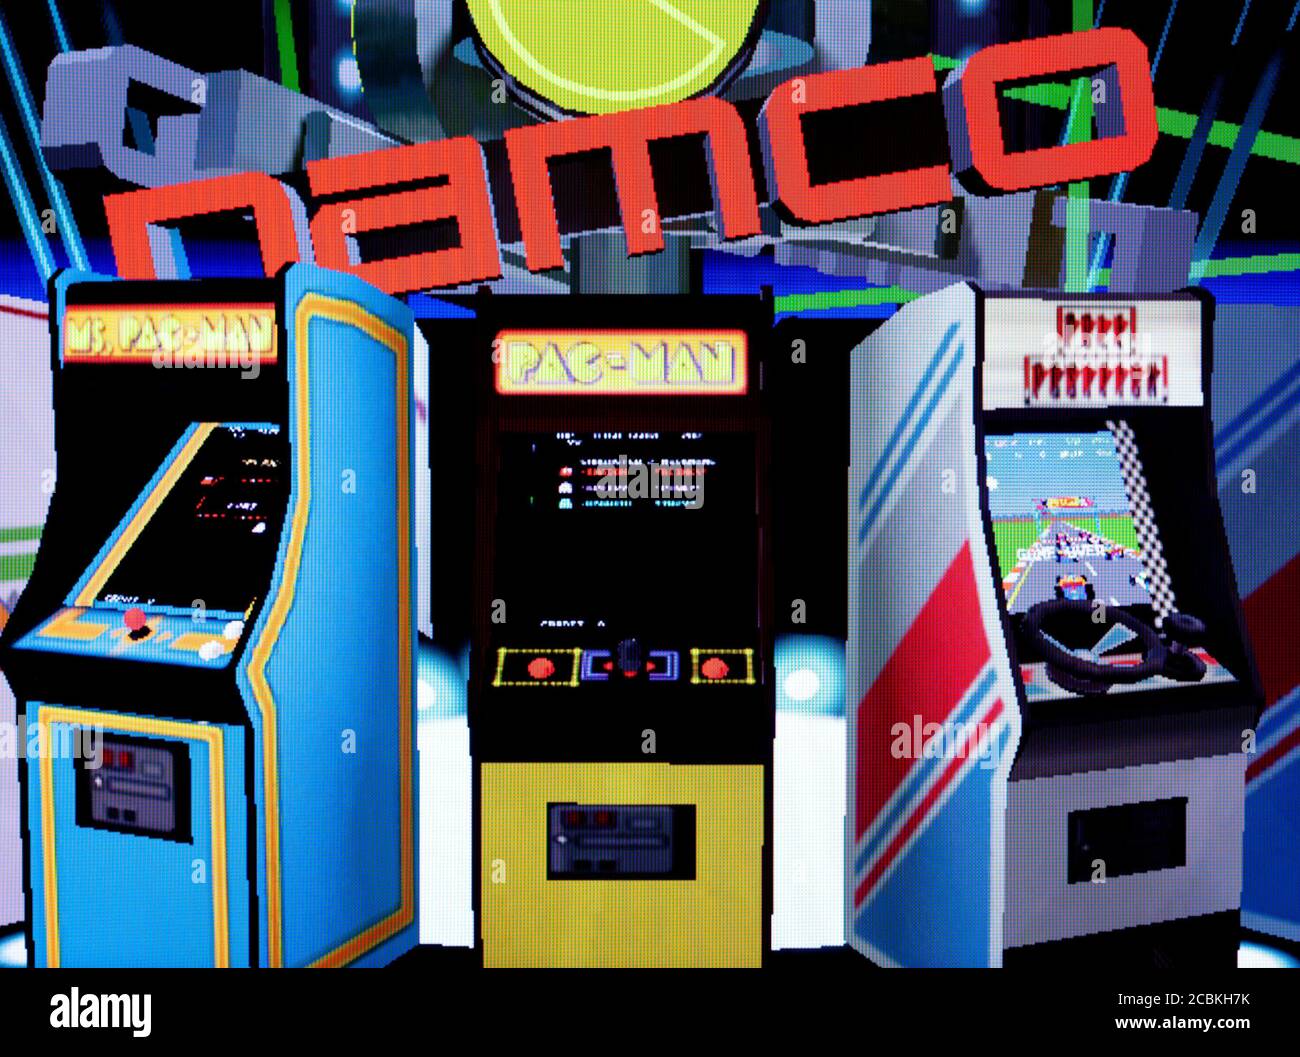 namco museum 50th anniversary pc download